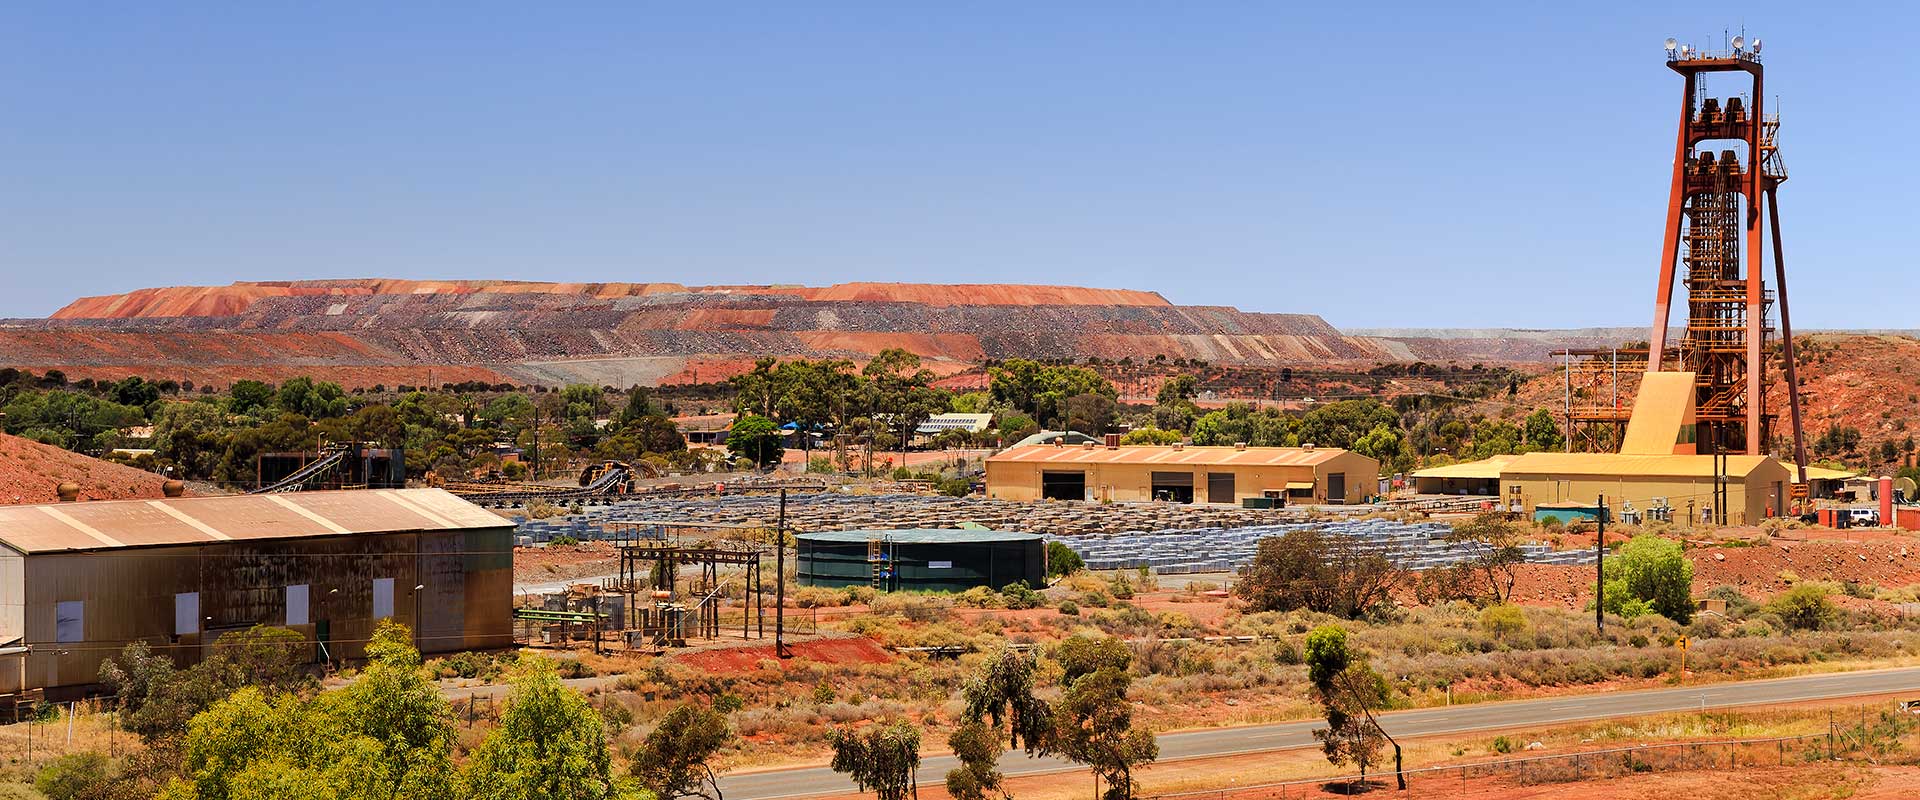 Pit frame of an old gold mine surrounded by red outback dirt and low brush shrubs in Kalgoorlie